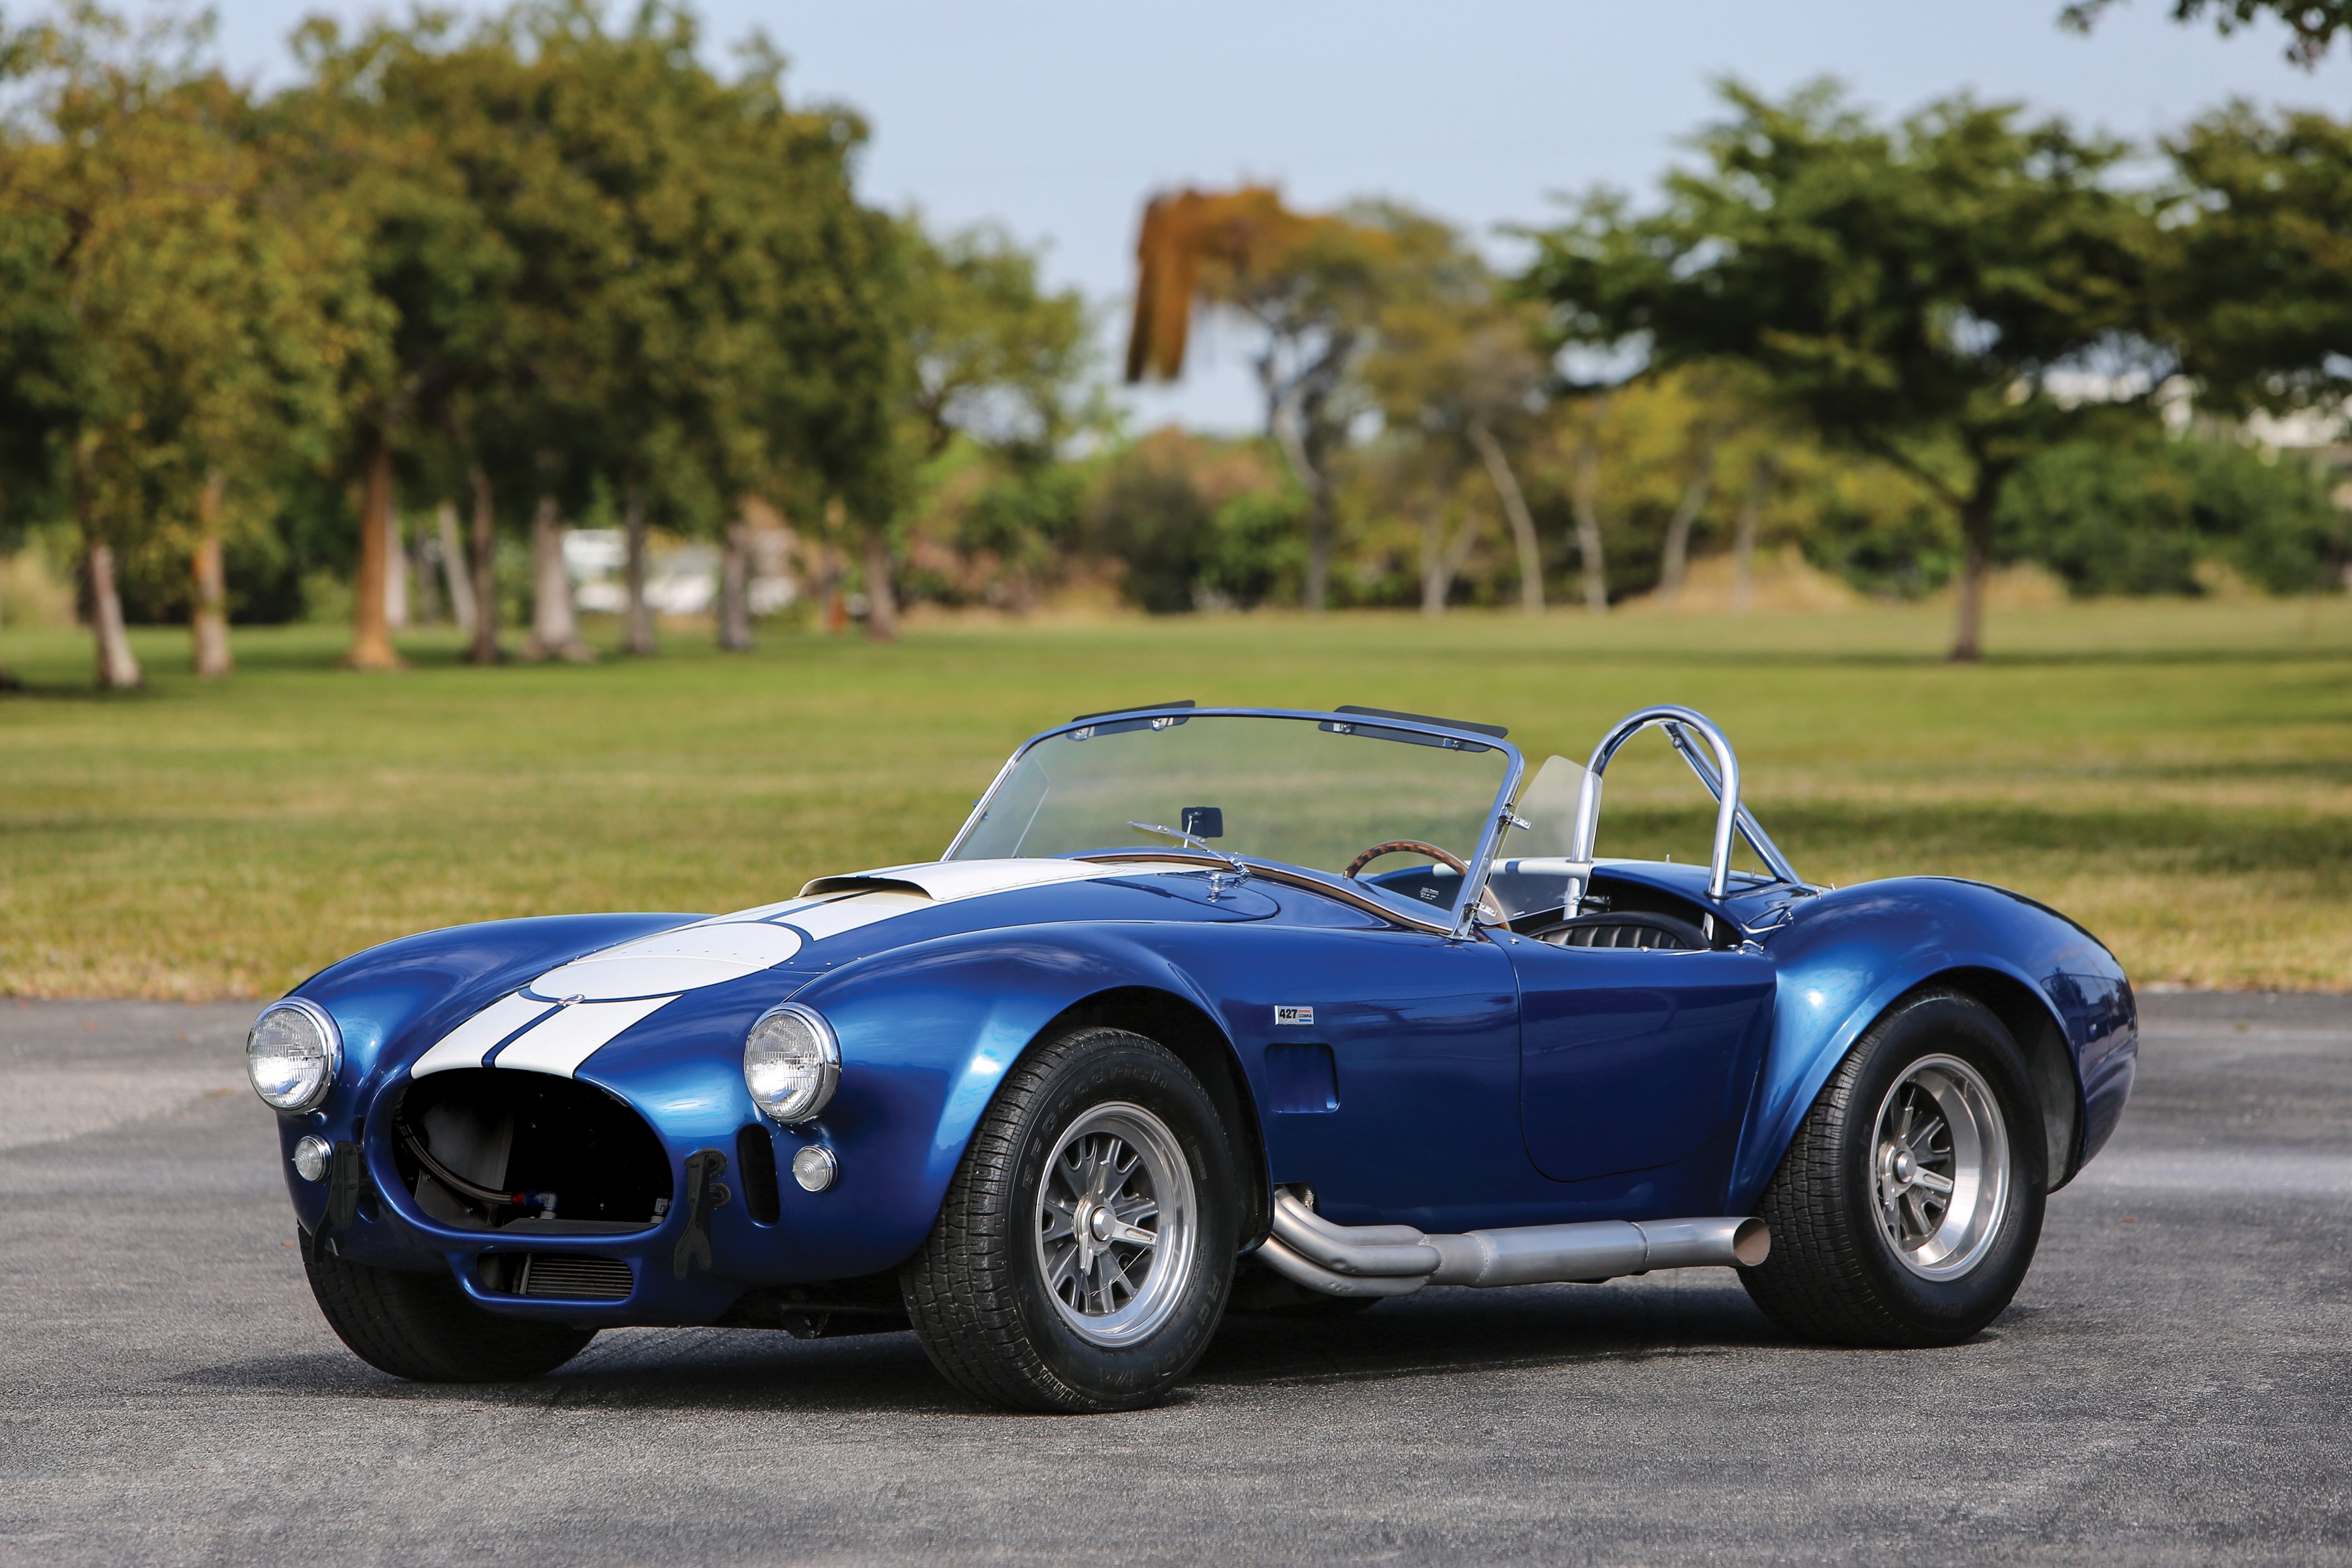 1967, Shelby, Cobra, 427, S c, Mkiii, Supercar, Muscle, Hot, Rod, Rods, Classic Wallpaper